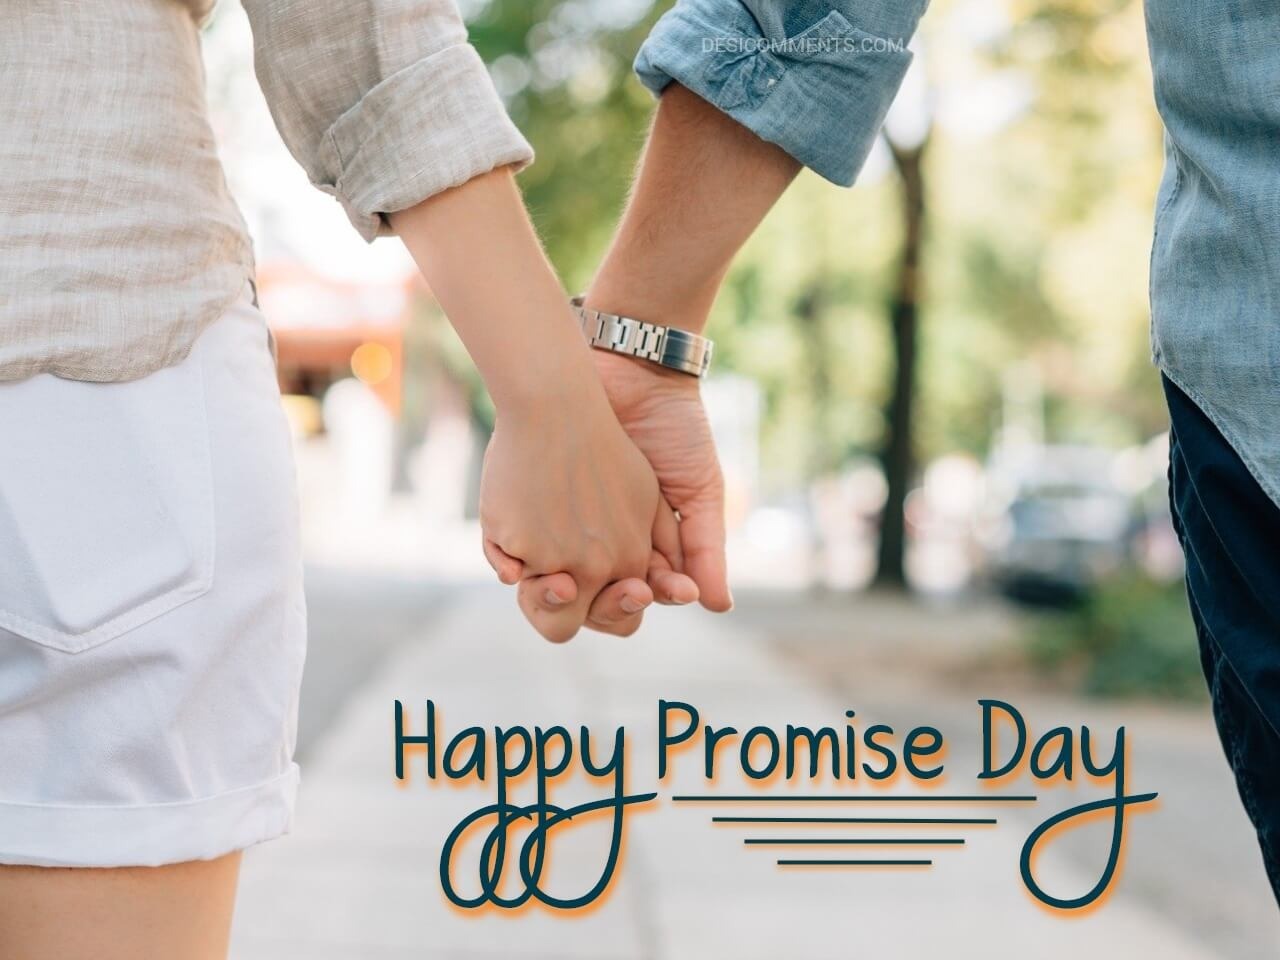 140+ Promise Day Images, Pictures, Photos | Desi Comments